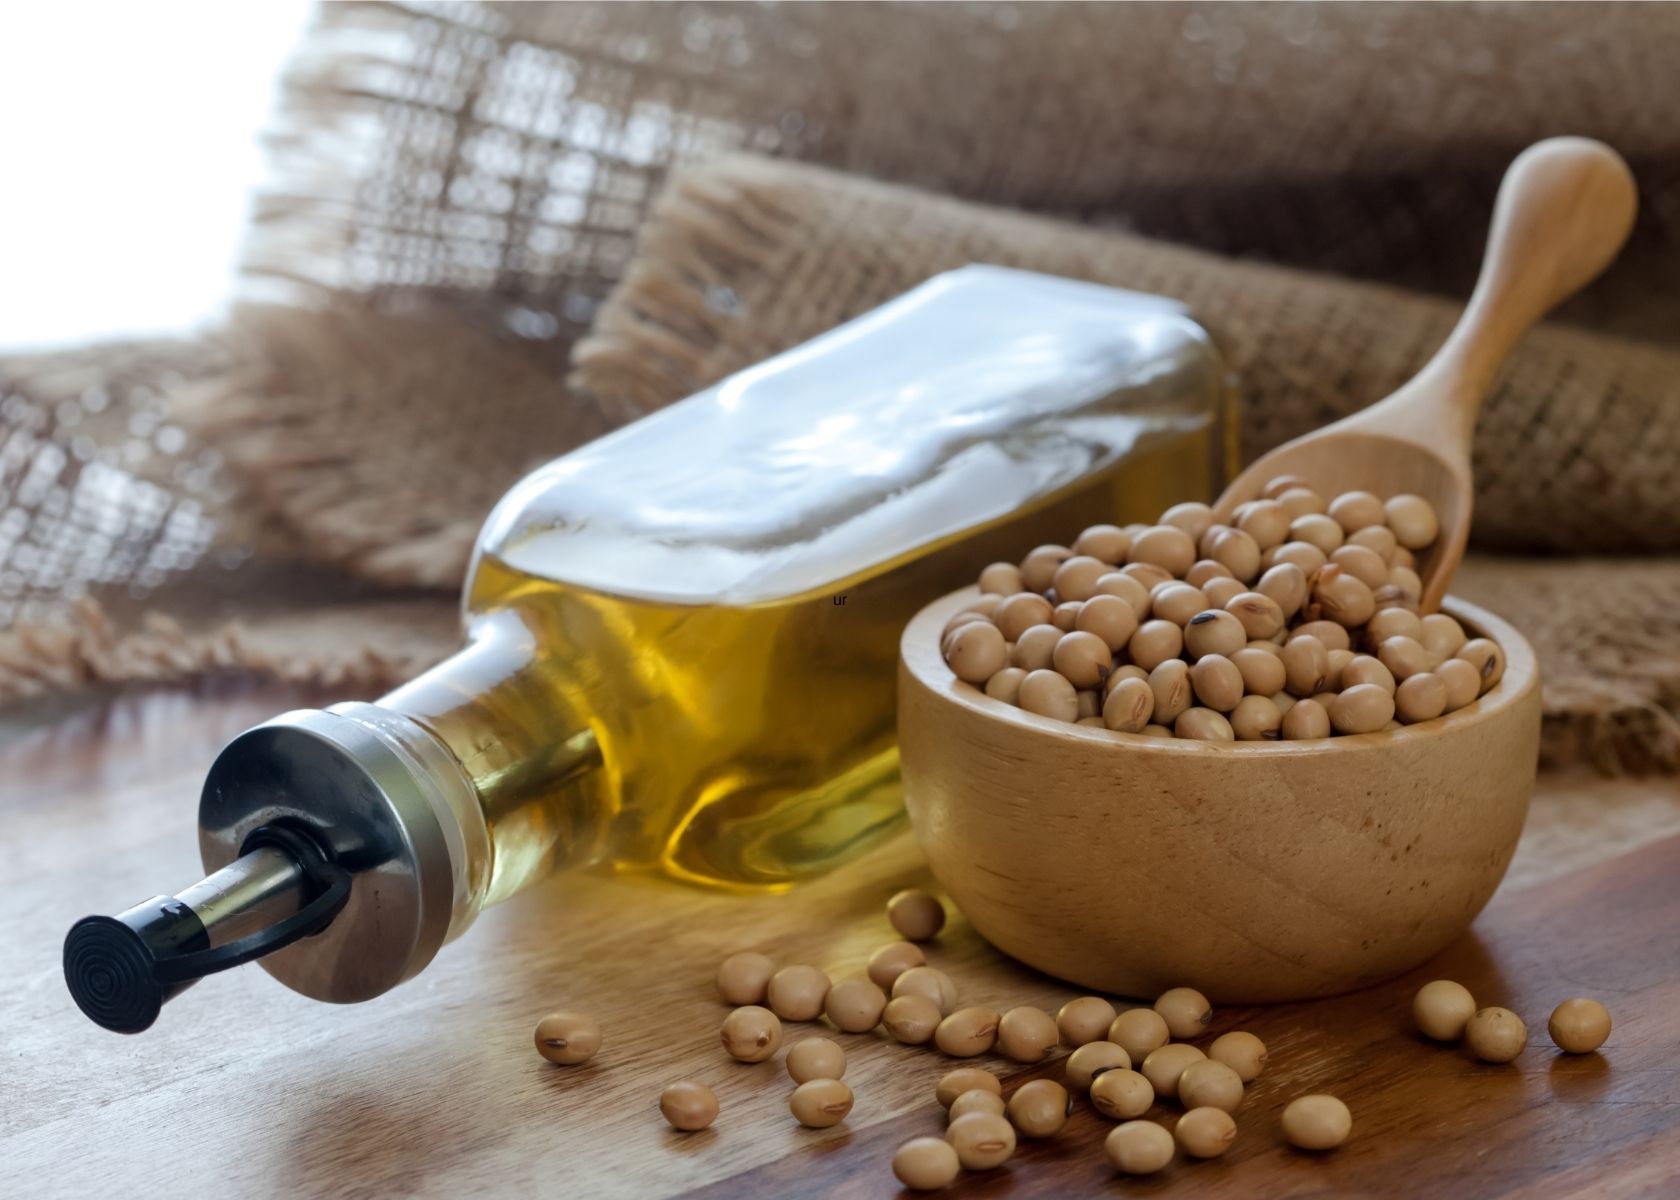 Soybean oil in glass bottle next to wooden bowl of soybeans pods with wooden spoon.